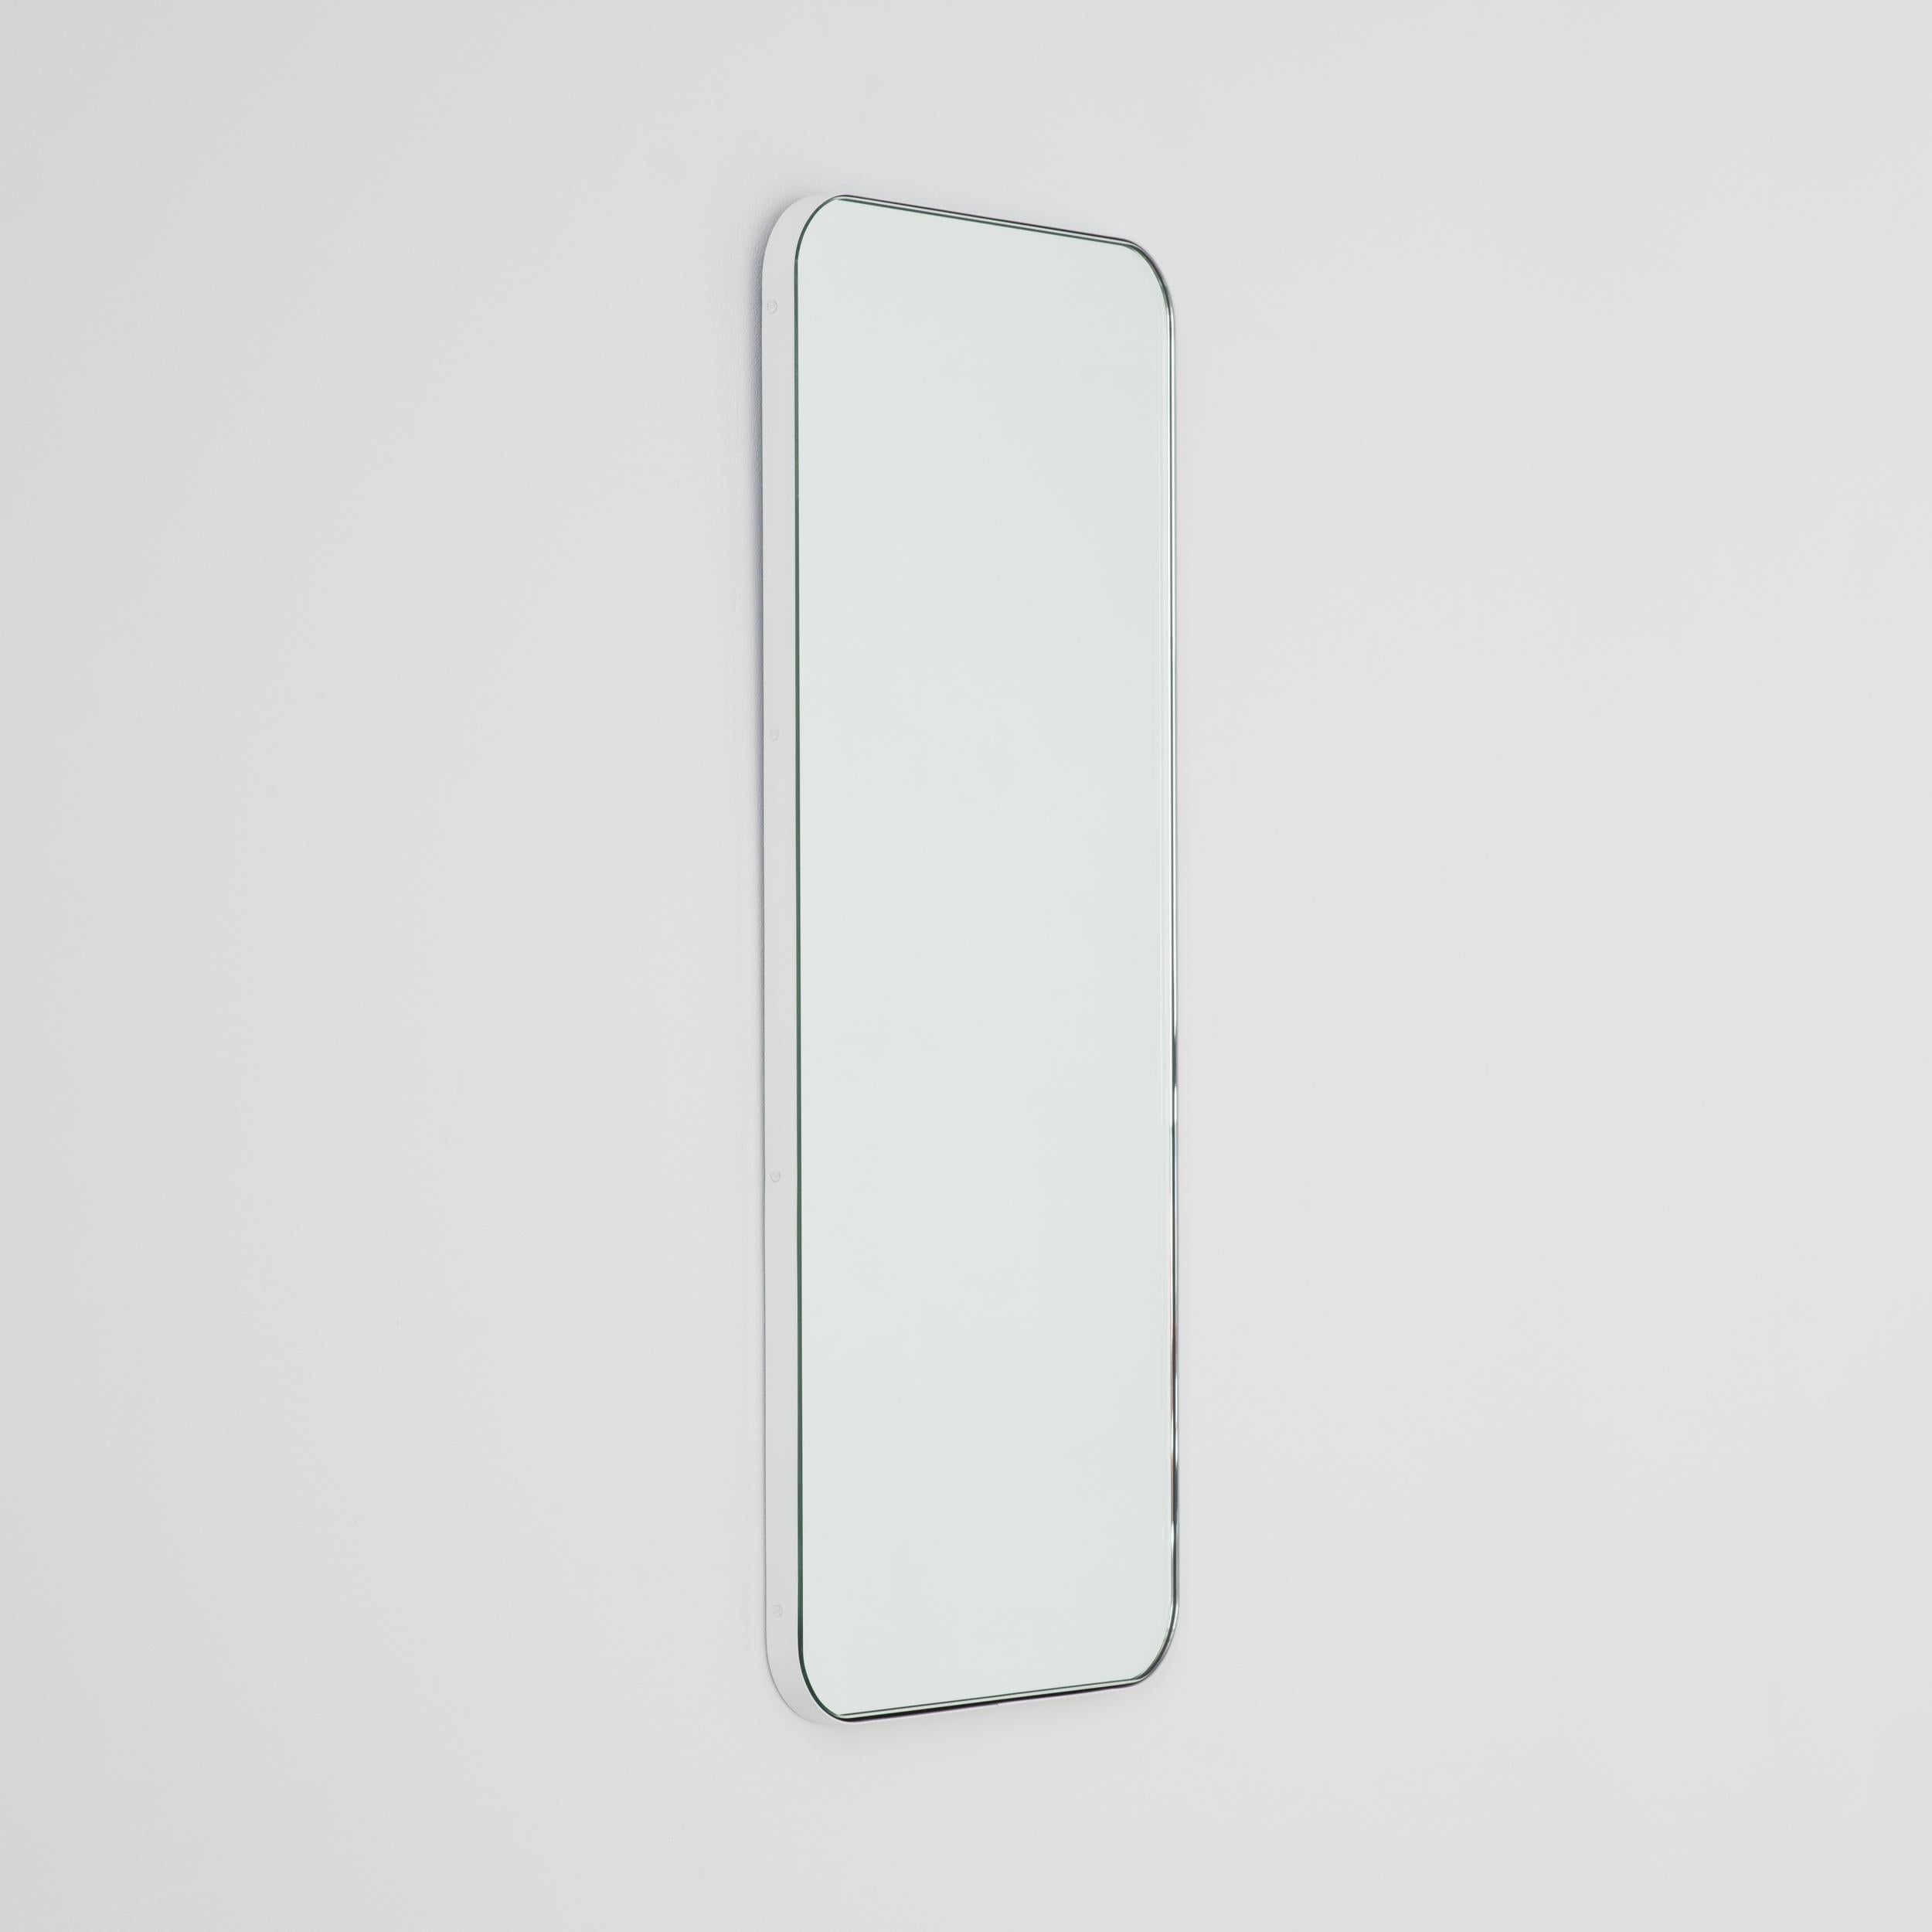 Quadris Rectangular Modern Mirror with a White Frame, Small In New Condition For Sale In London, GB